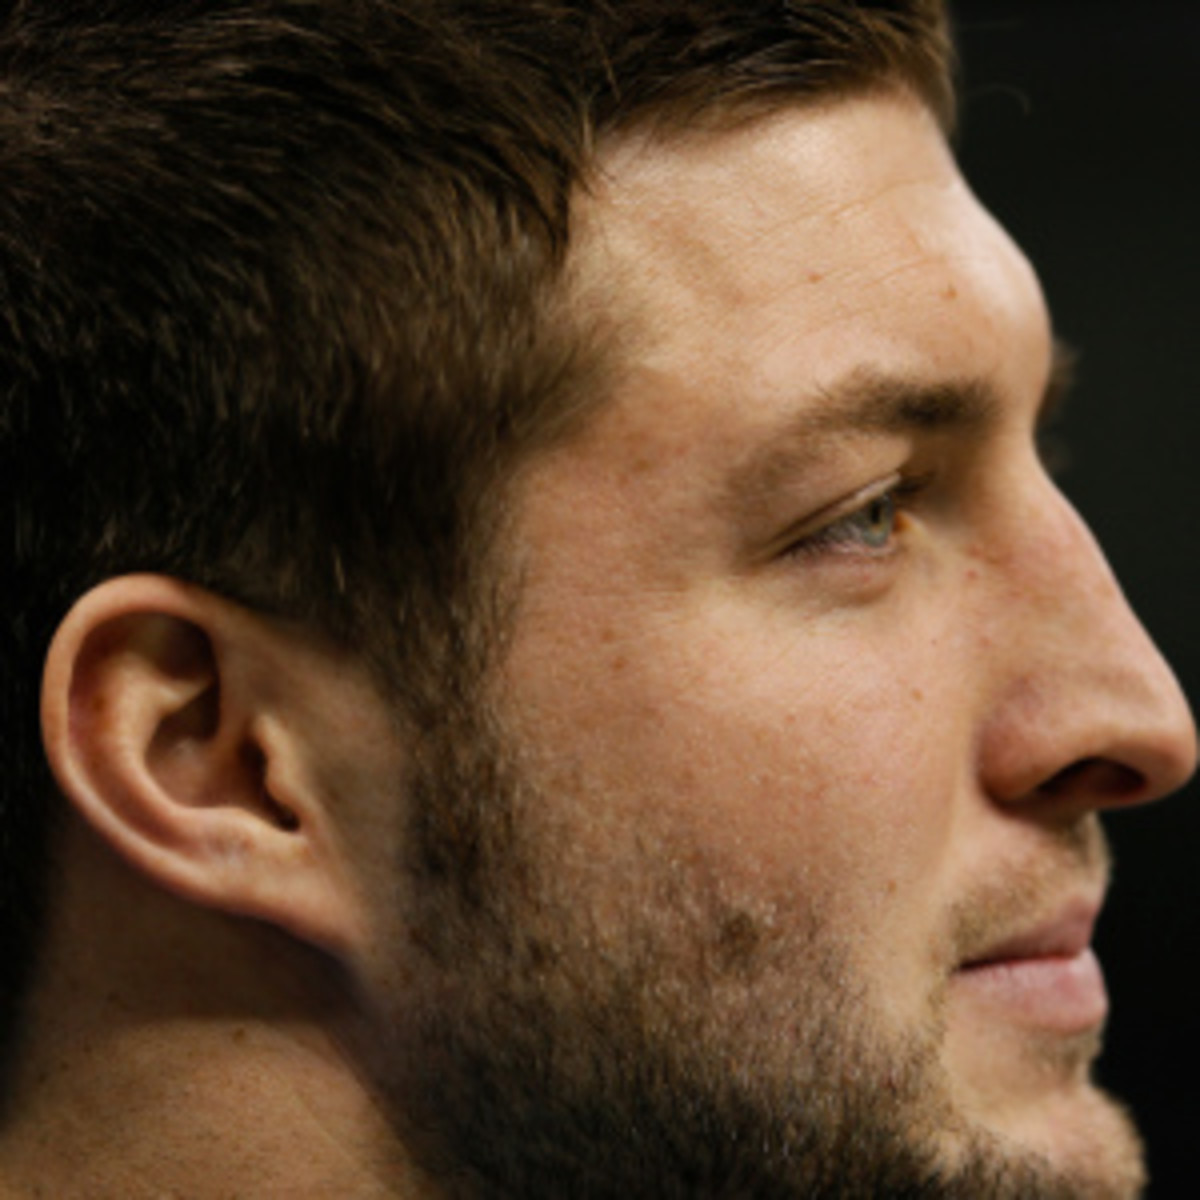 New York Jets quarterback Tim Tebow cancelled an appearance with the First Baptist Church of Dallas amid "new information" that was brought to his attention. (Kevin C. Cox/Getty Images)